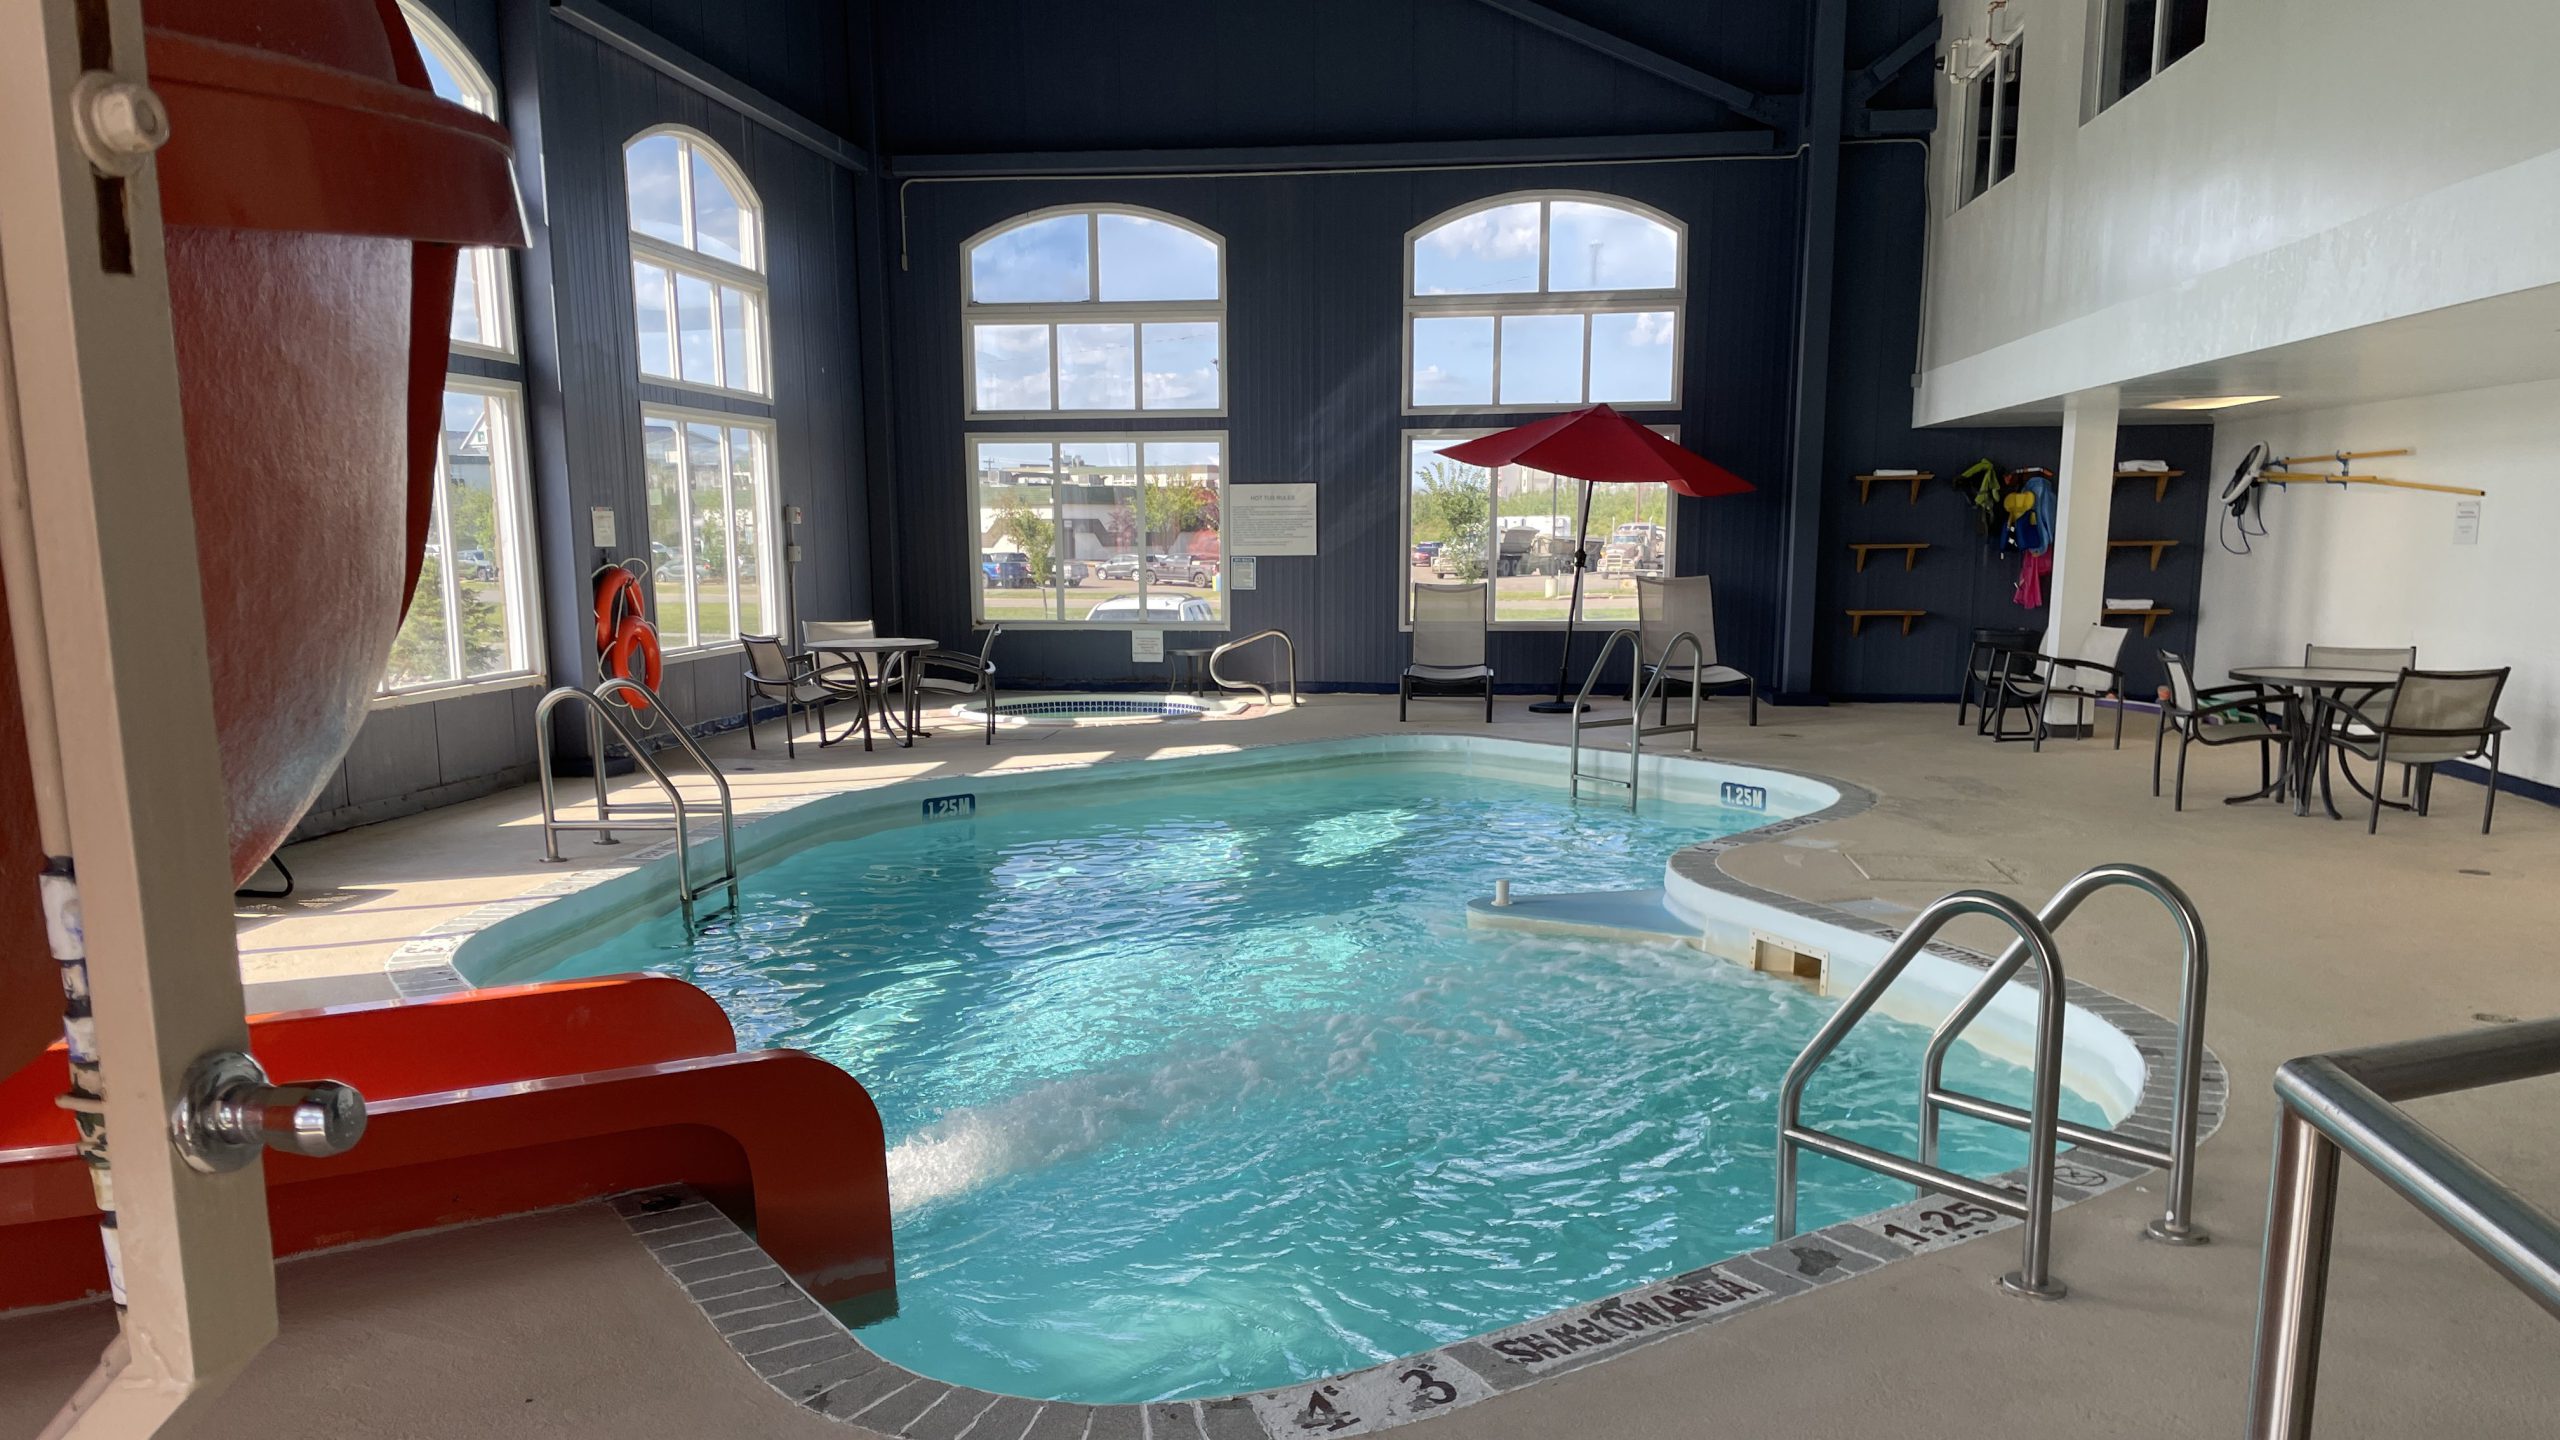 The Best Hotel Pool In Fort McMurray (We LOVE It!)